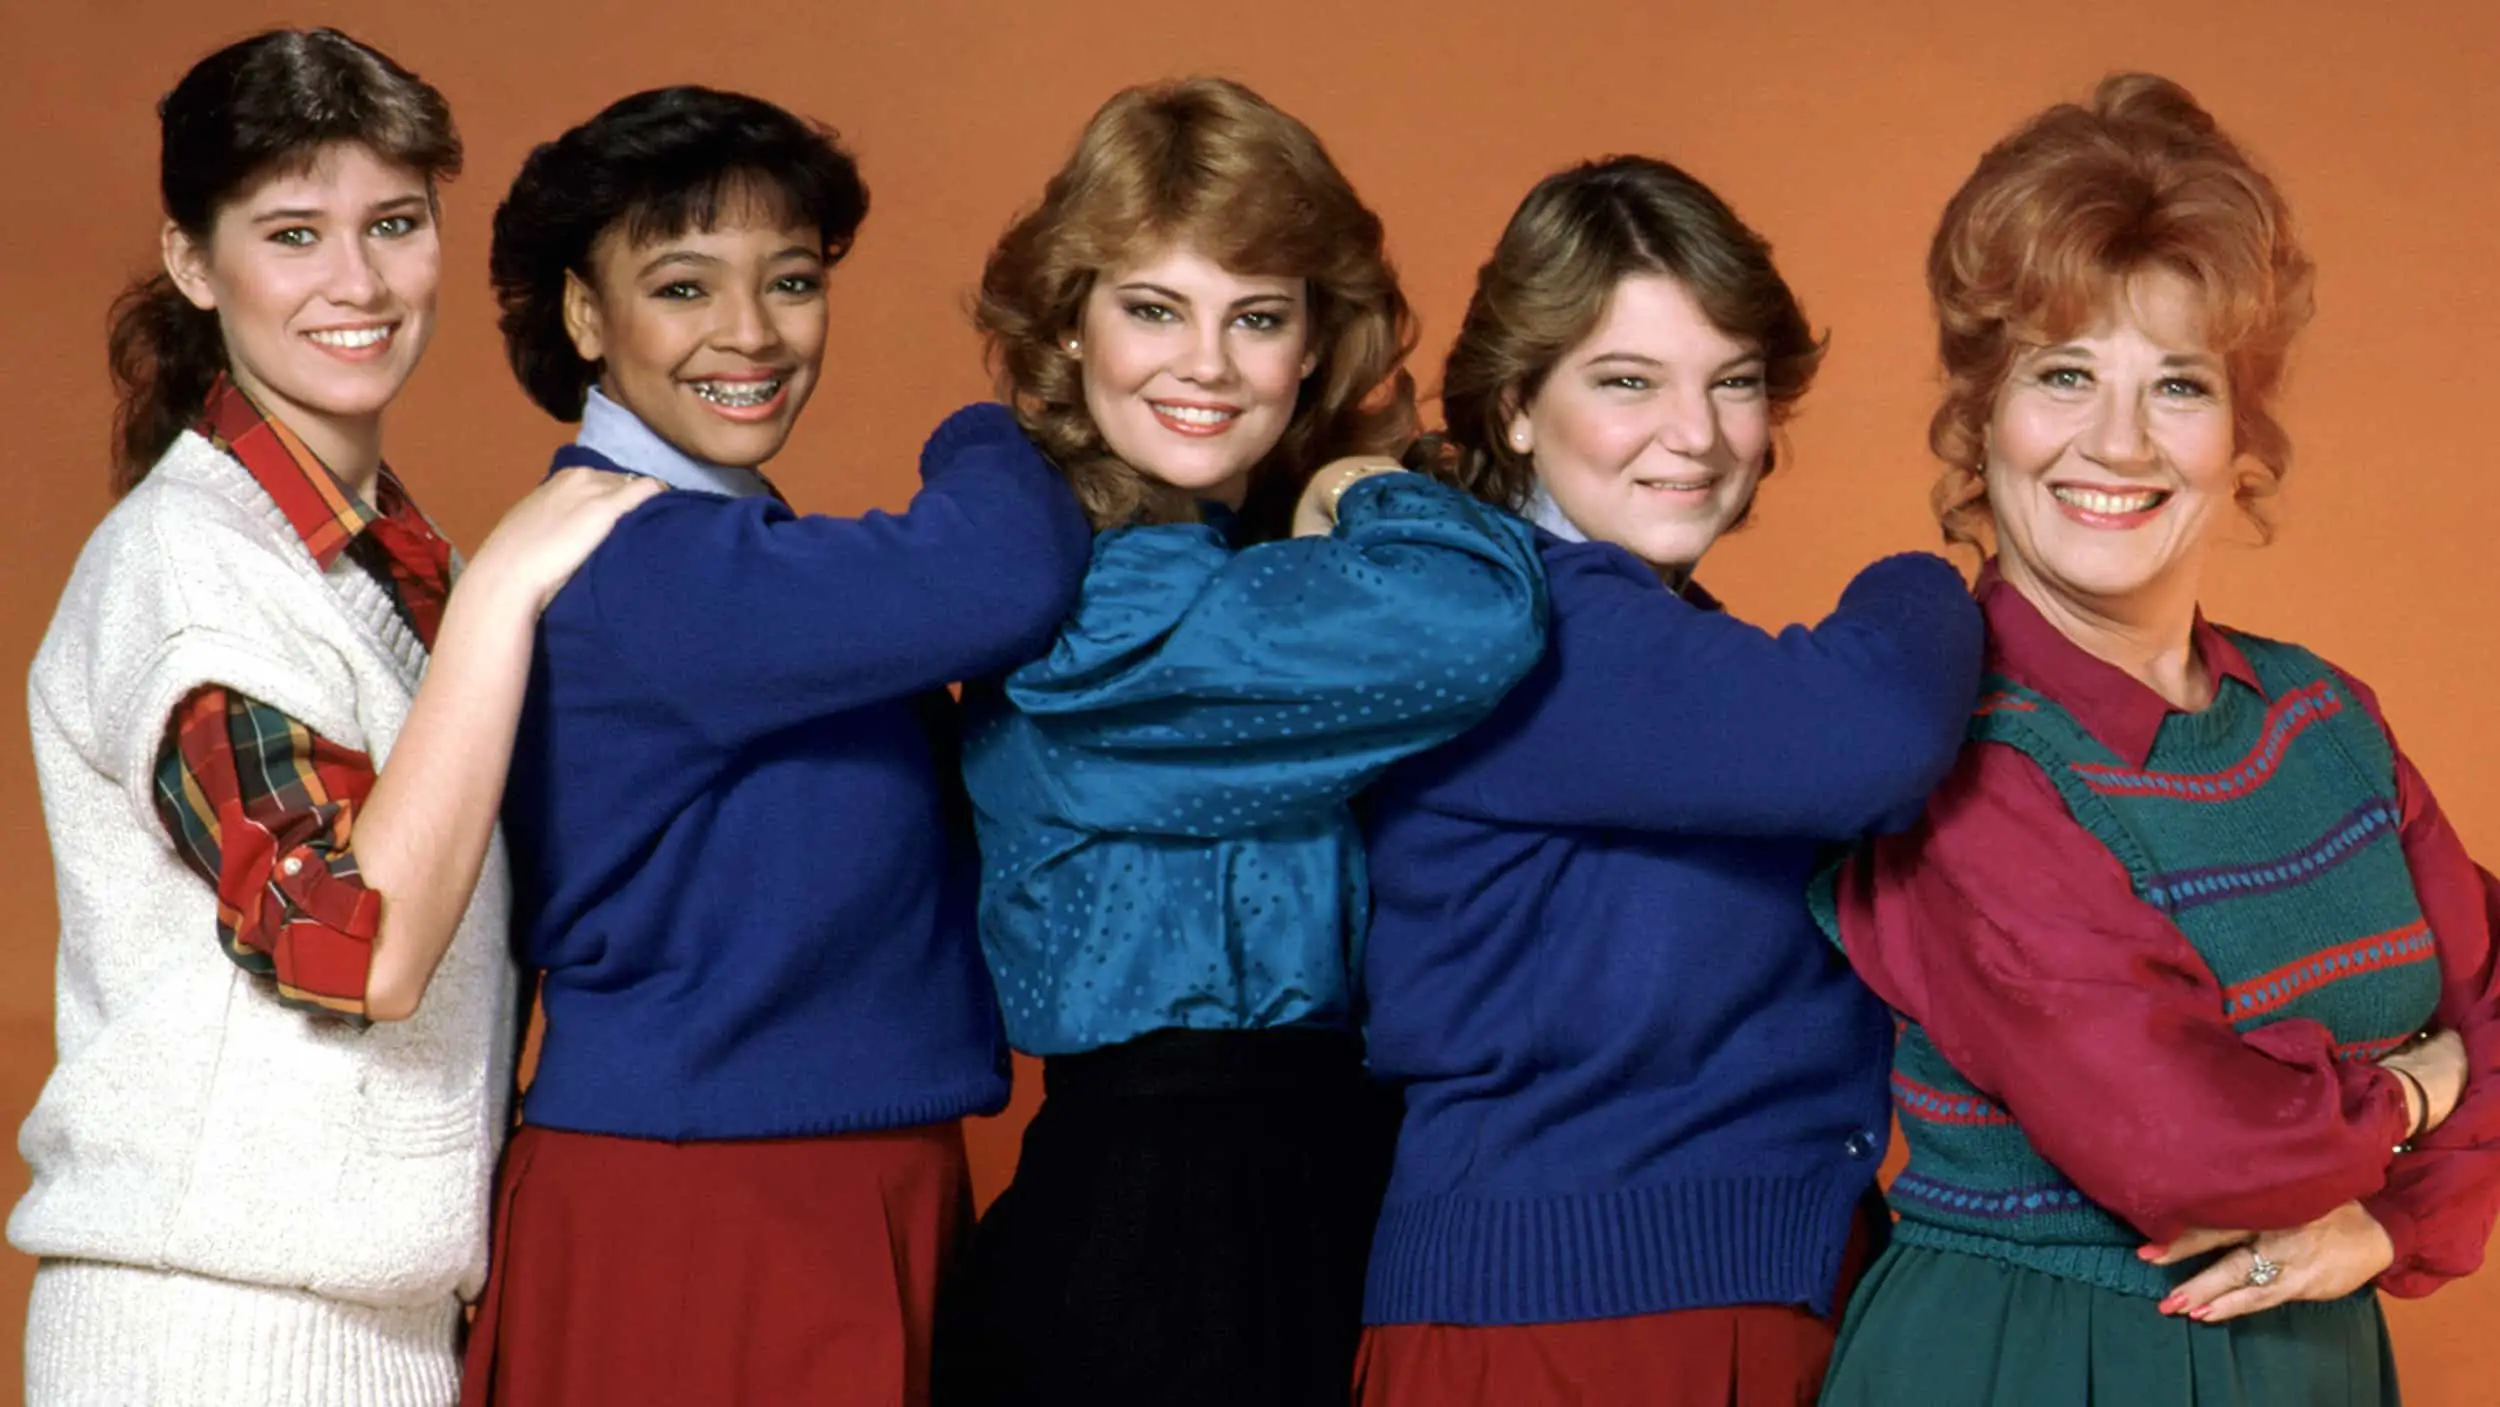 The cast of "The Facts of Life."